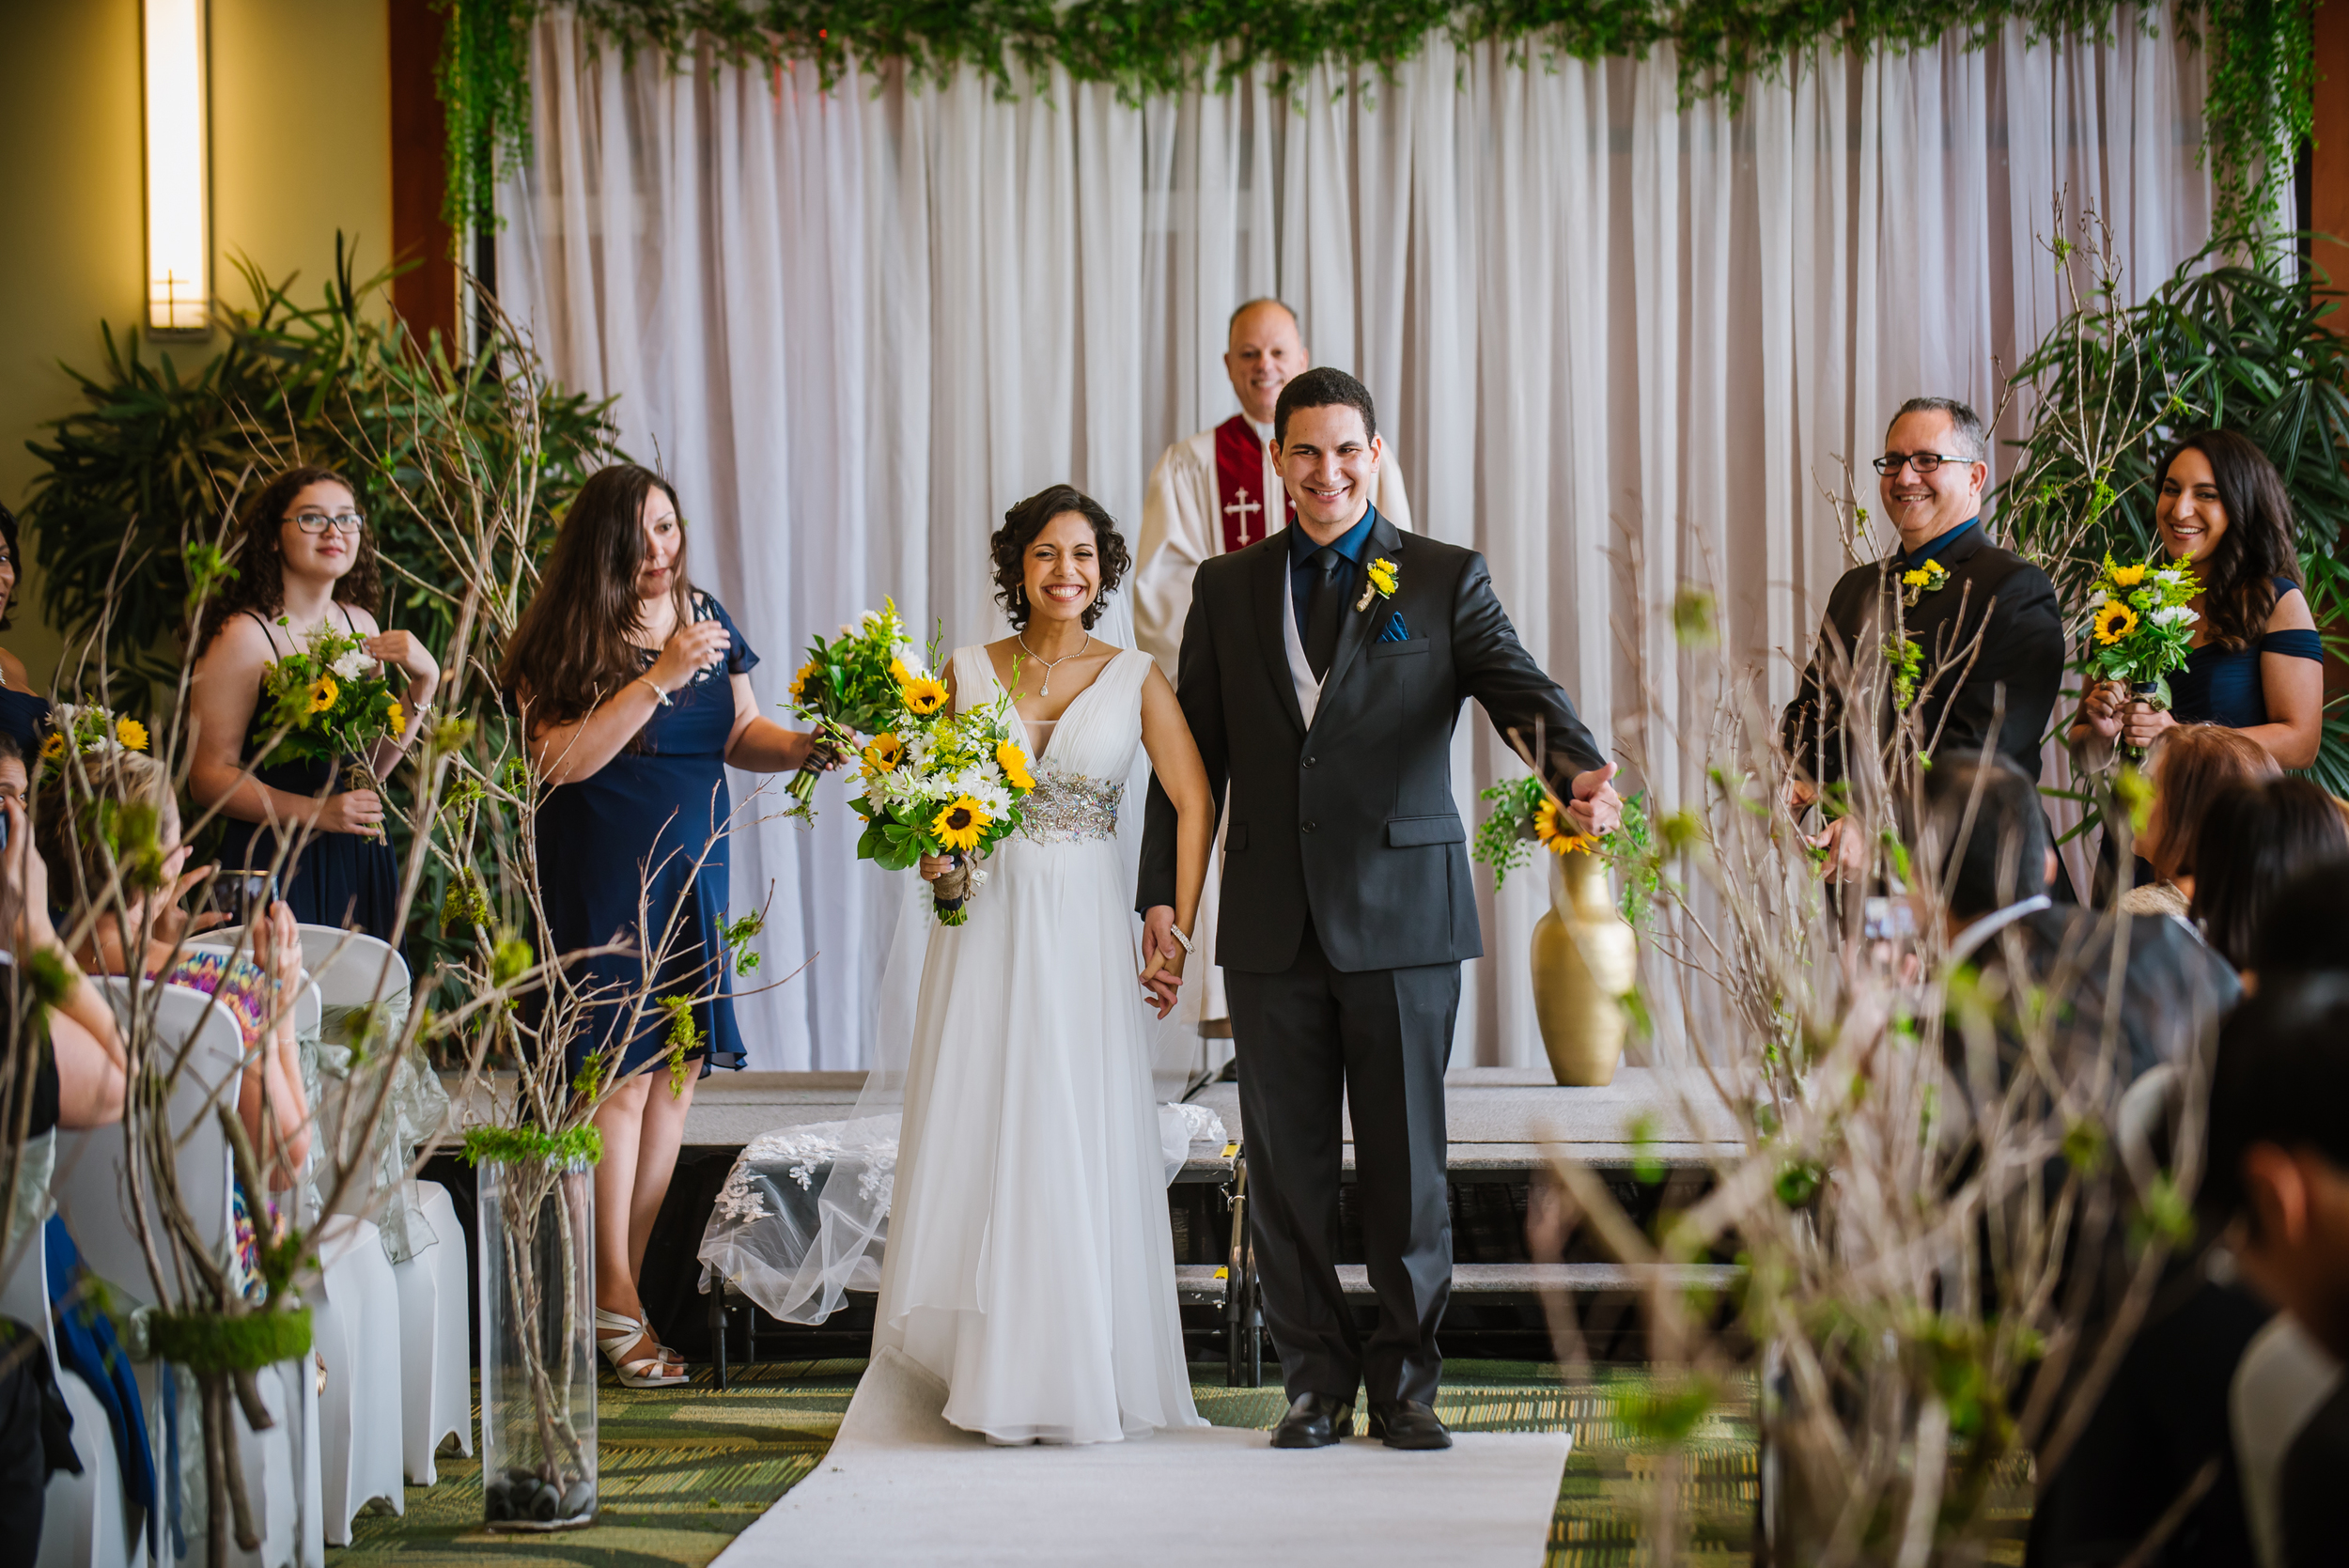 Shaime and Bryan met at USF and got married at USF! They were so excited and true to themselves with their sophisticated Lord of the Rings theme!